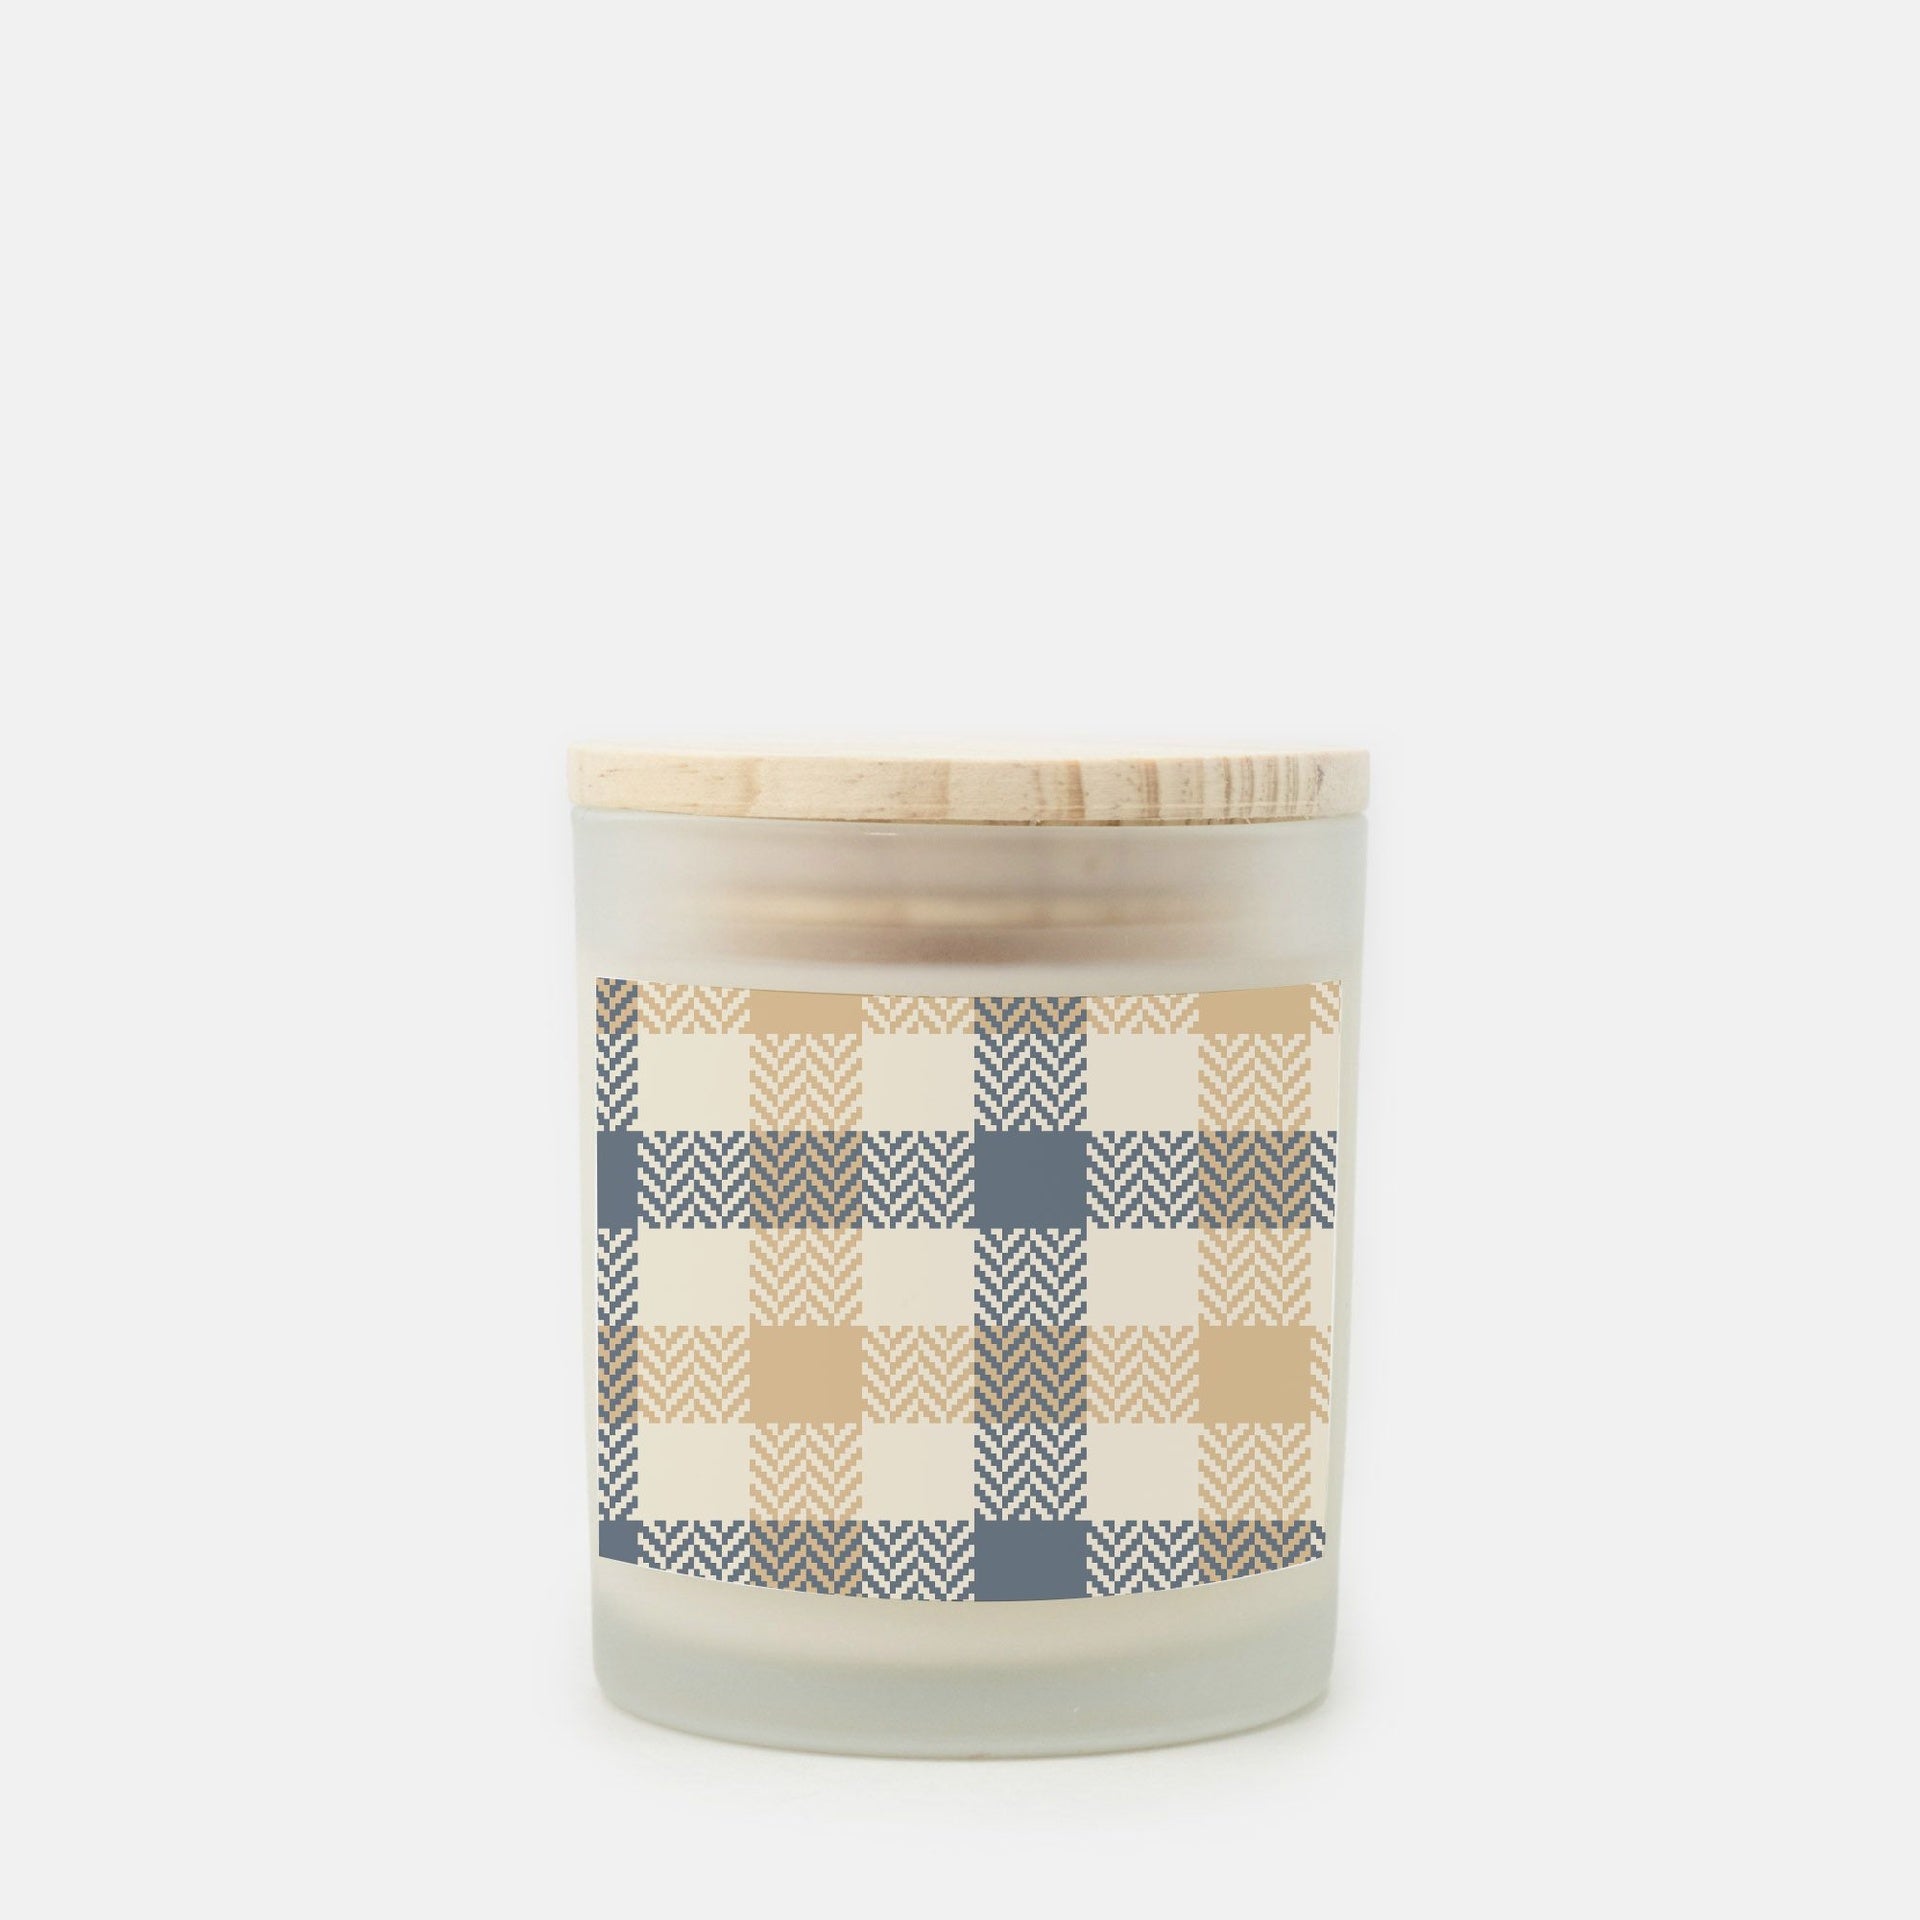 Lifestyle Details - Blue & Natural Plaid Frosted Glass Candle - Cashmere Vanilla